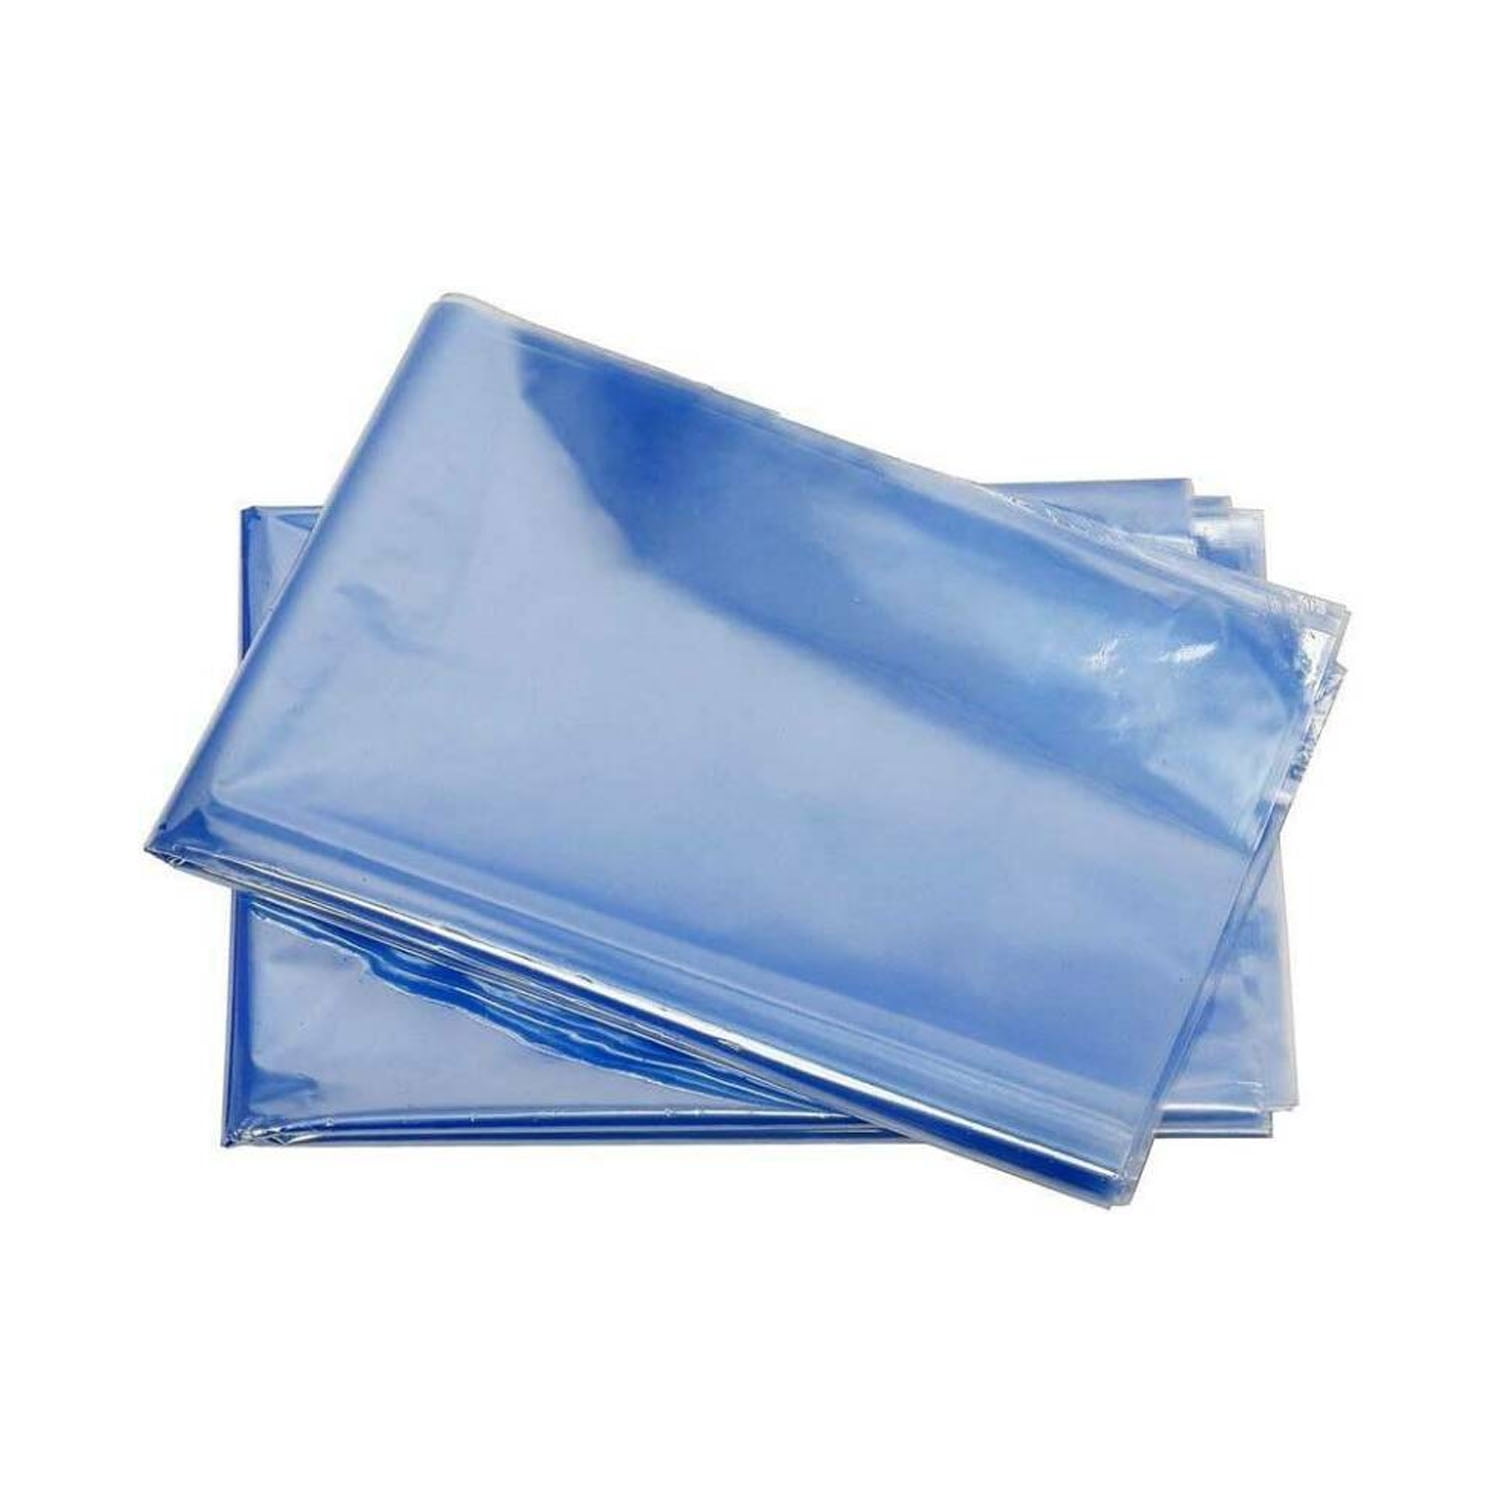 Clear Shrink Wrap Bags, 20 Count Pack